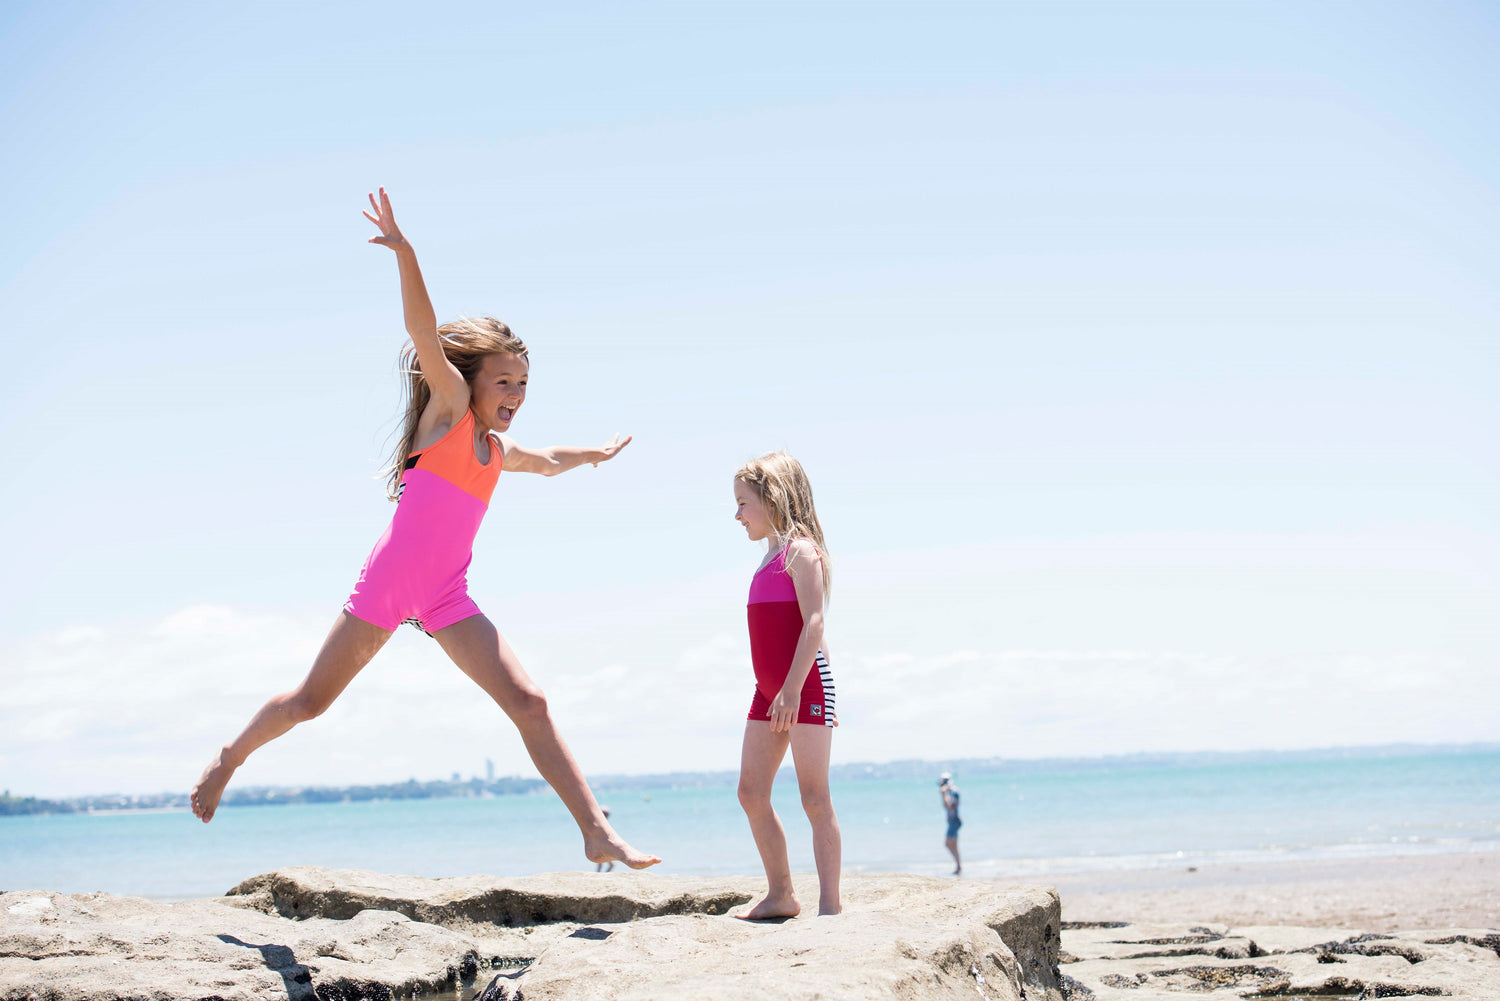 What Colour Swimwear Is Best for Kids' Safety?